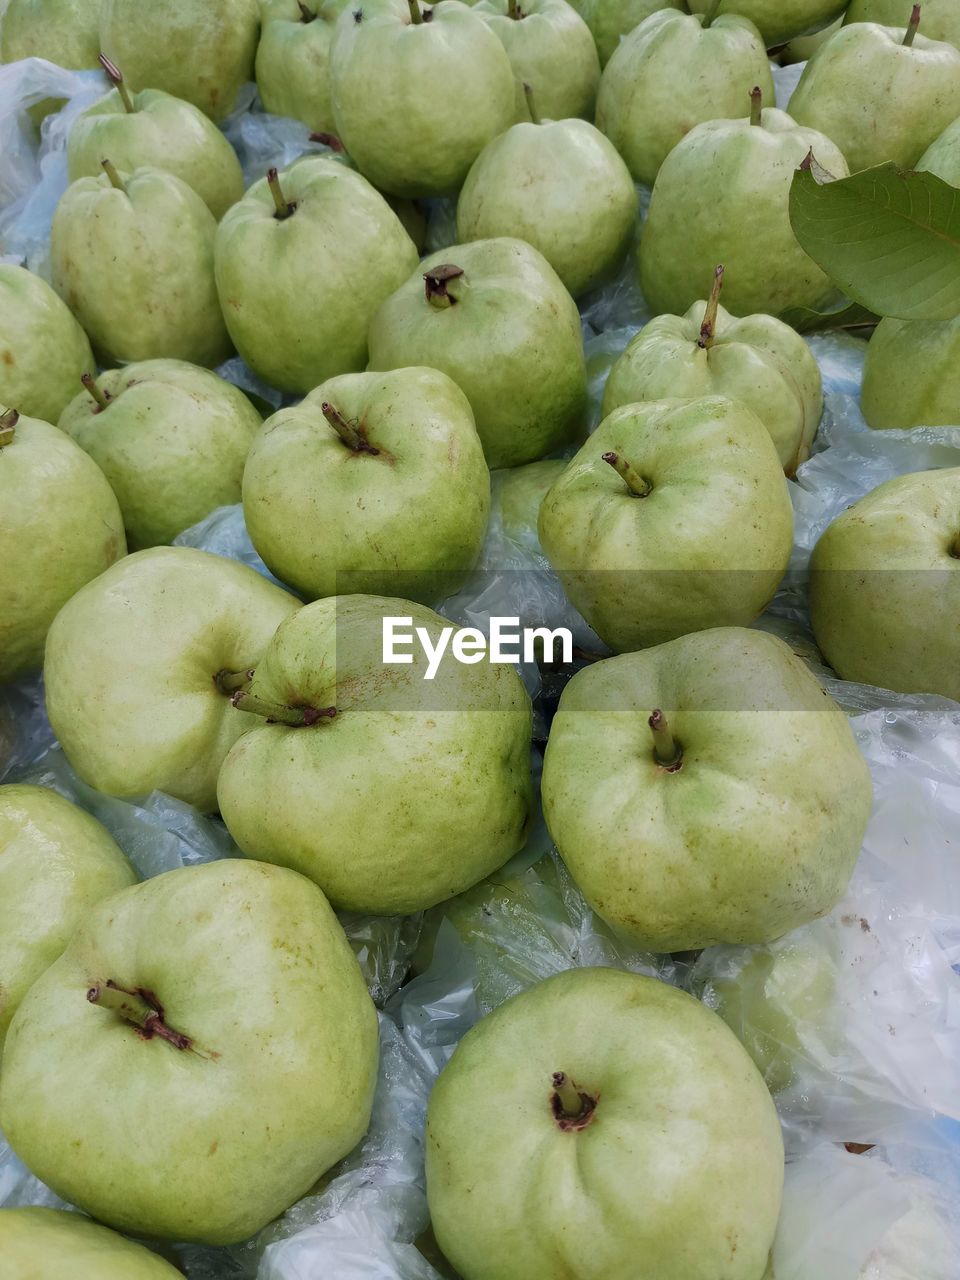 HIGH ANGLE VIEW OF APPLES IN CONTAINER